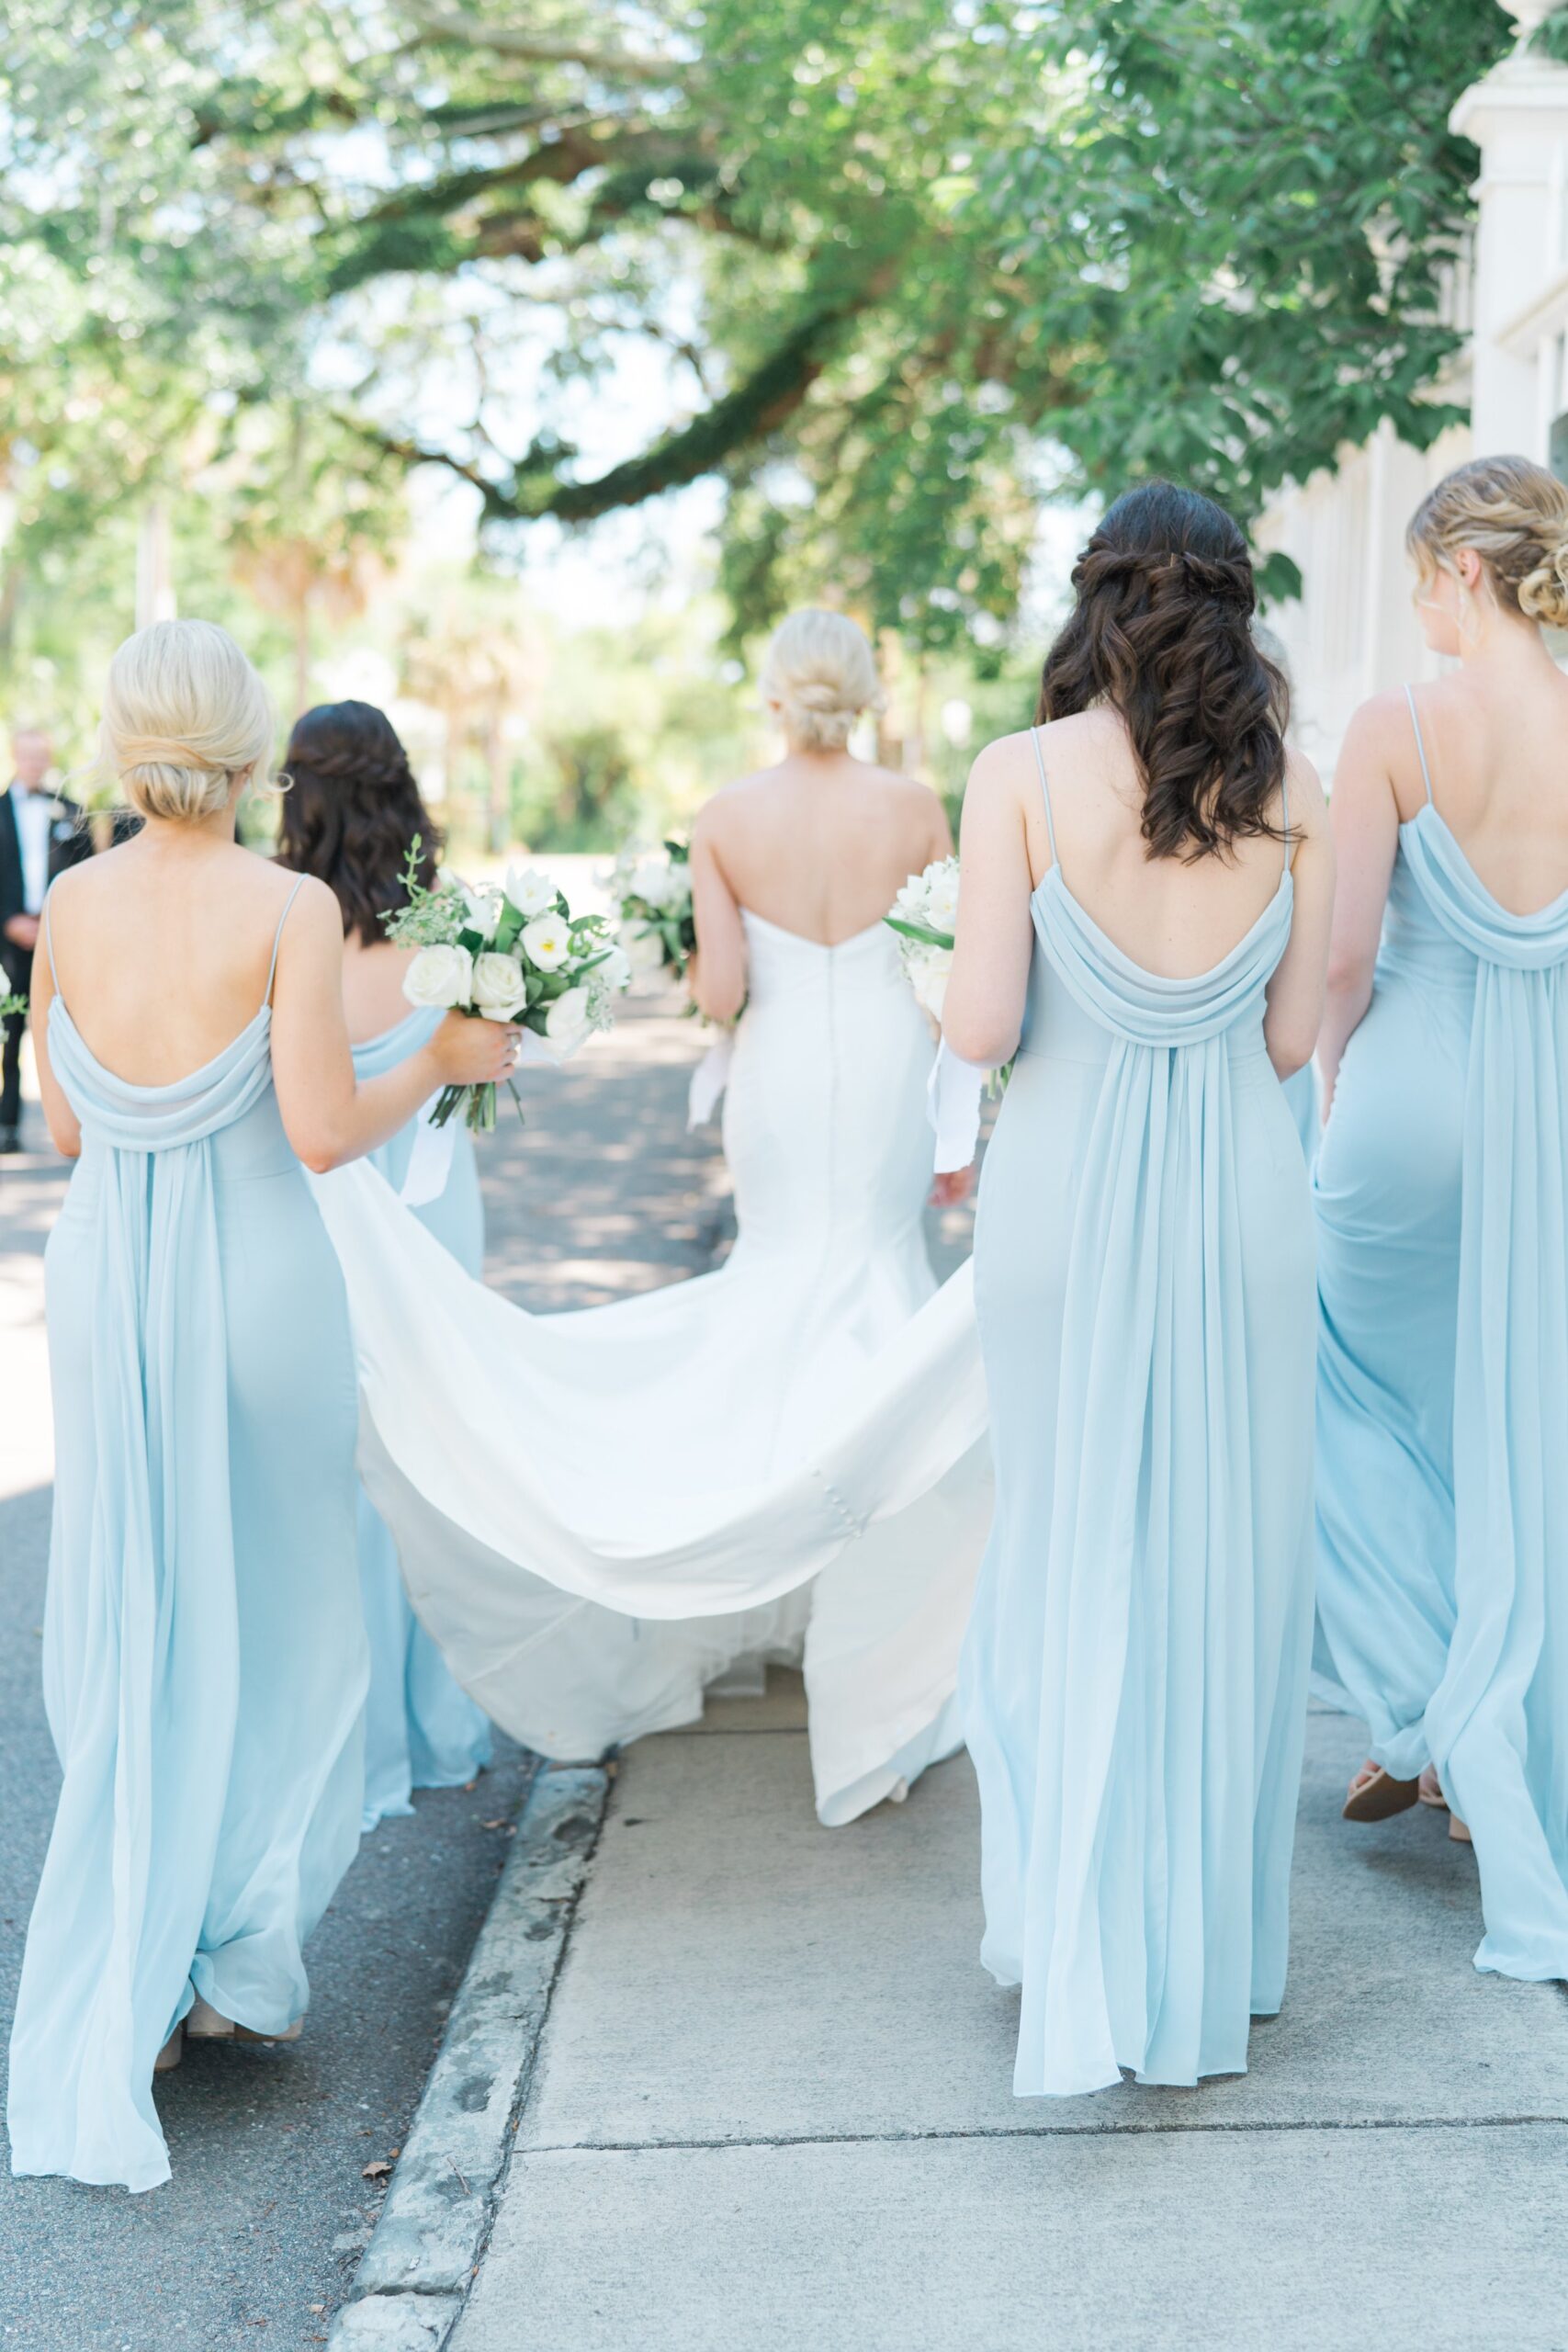 Bride and bridesmaids walking away. Bridesmaid dresses with flowy details on back of dress.